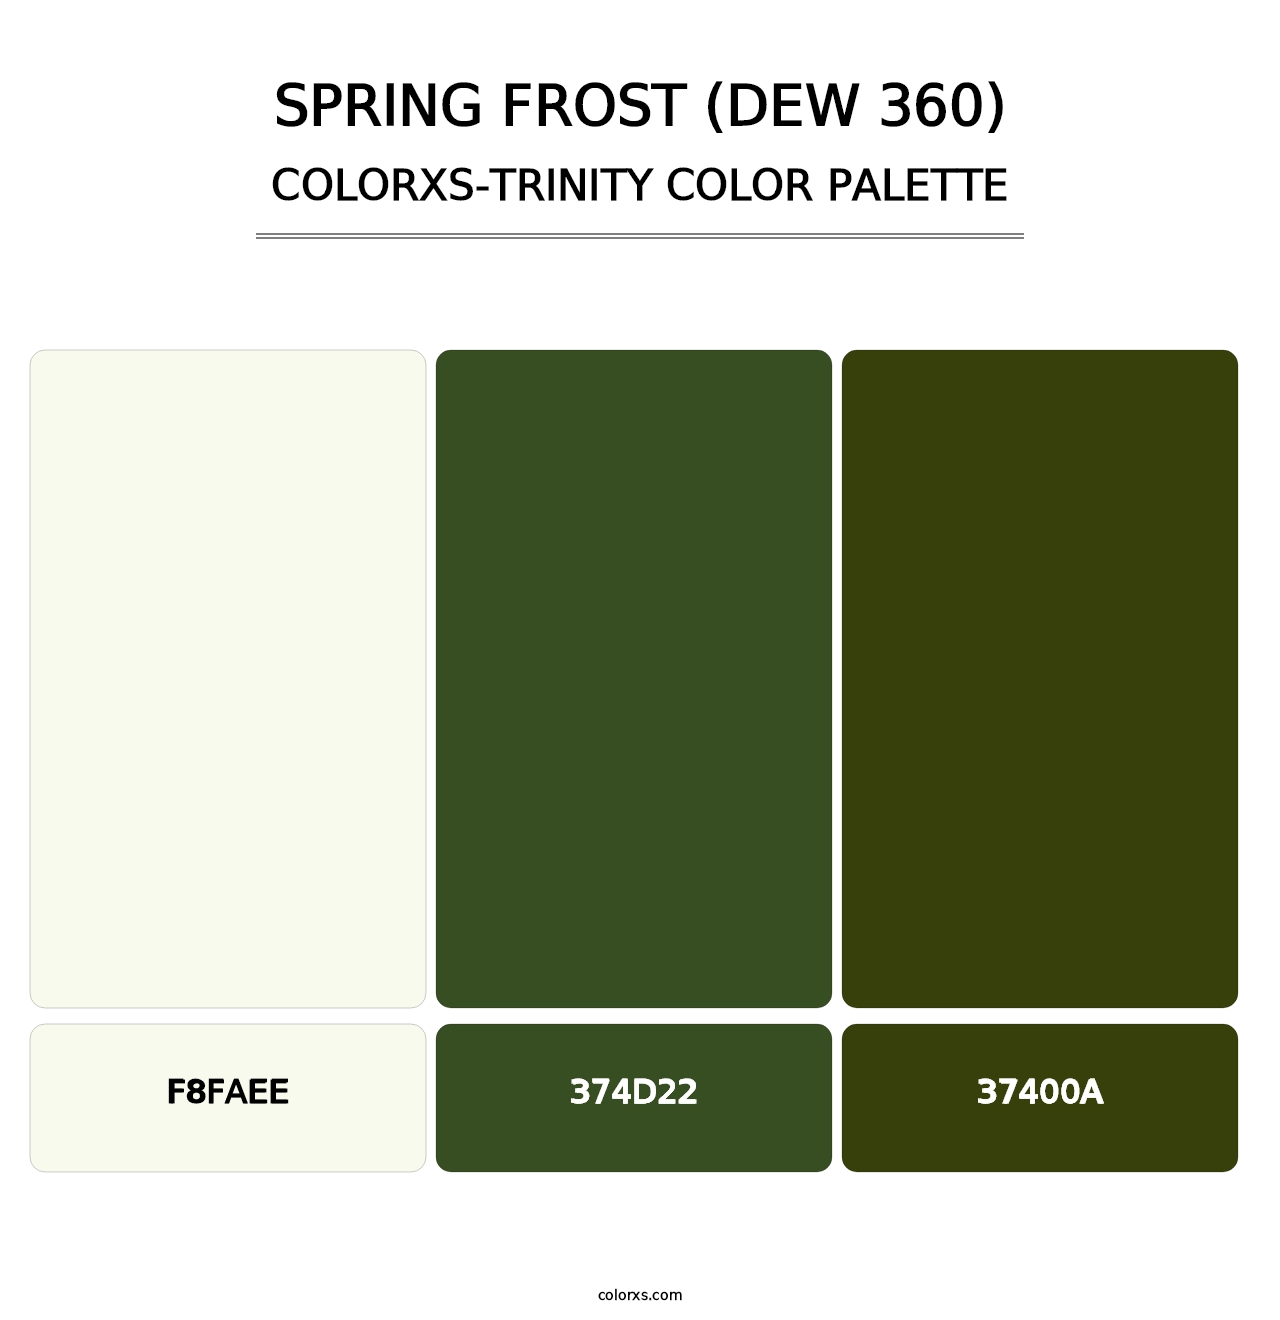 Spring Frost (DEW 360) - Colorxs Trinity Palette